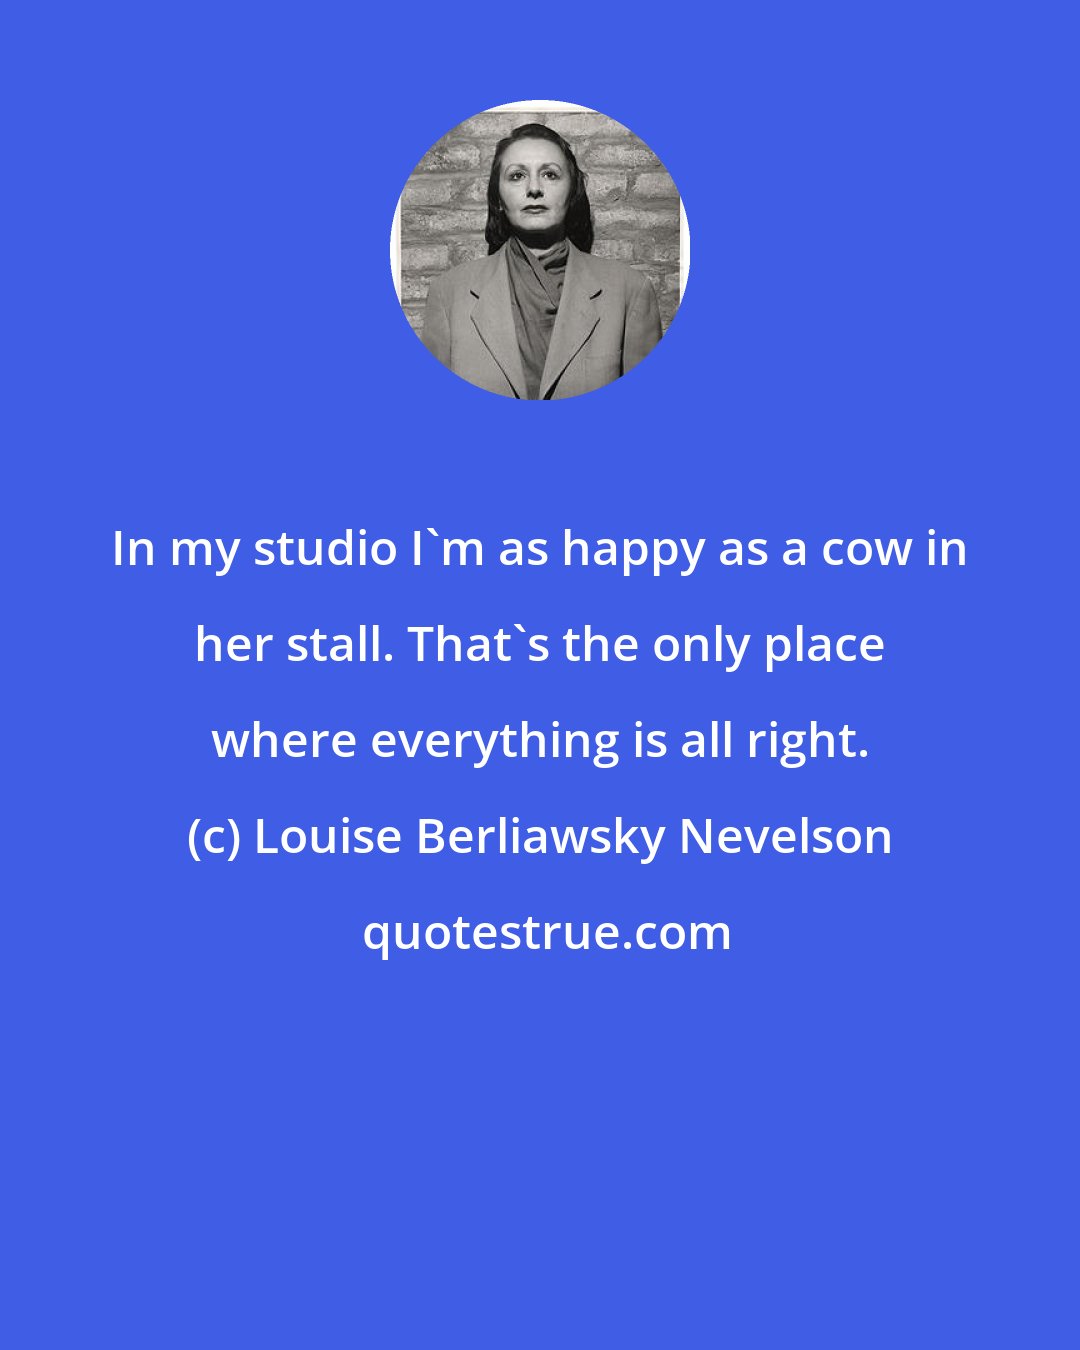 Louise Berliawsky Nevelson: In my studio I'm as happy as a cow in her stall. That's the only place where everything is all right.